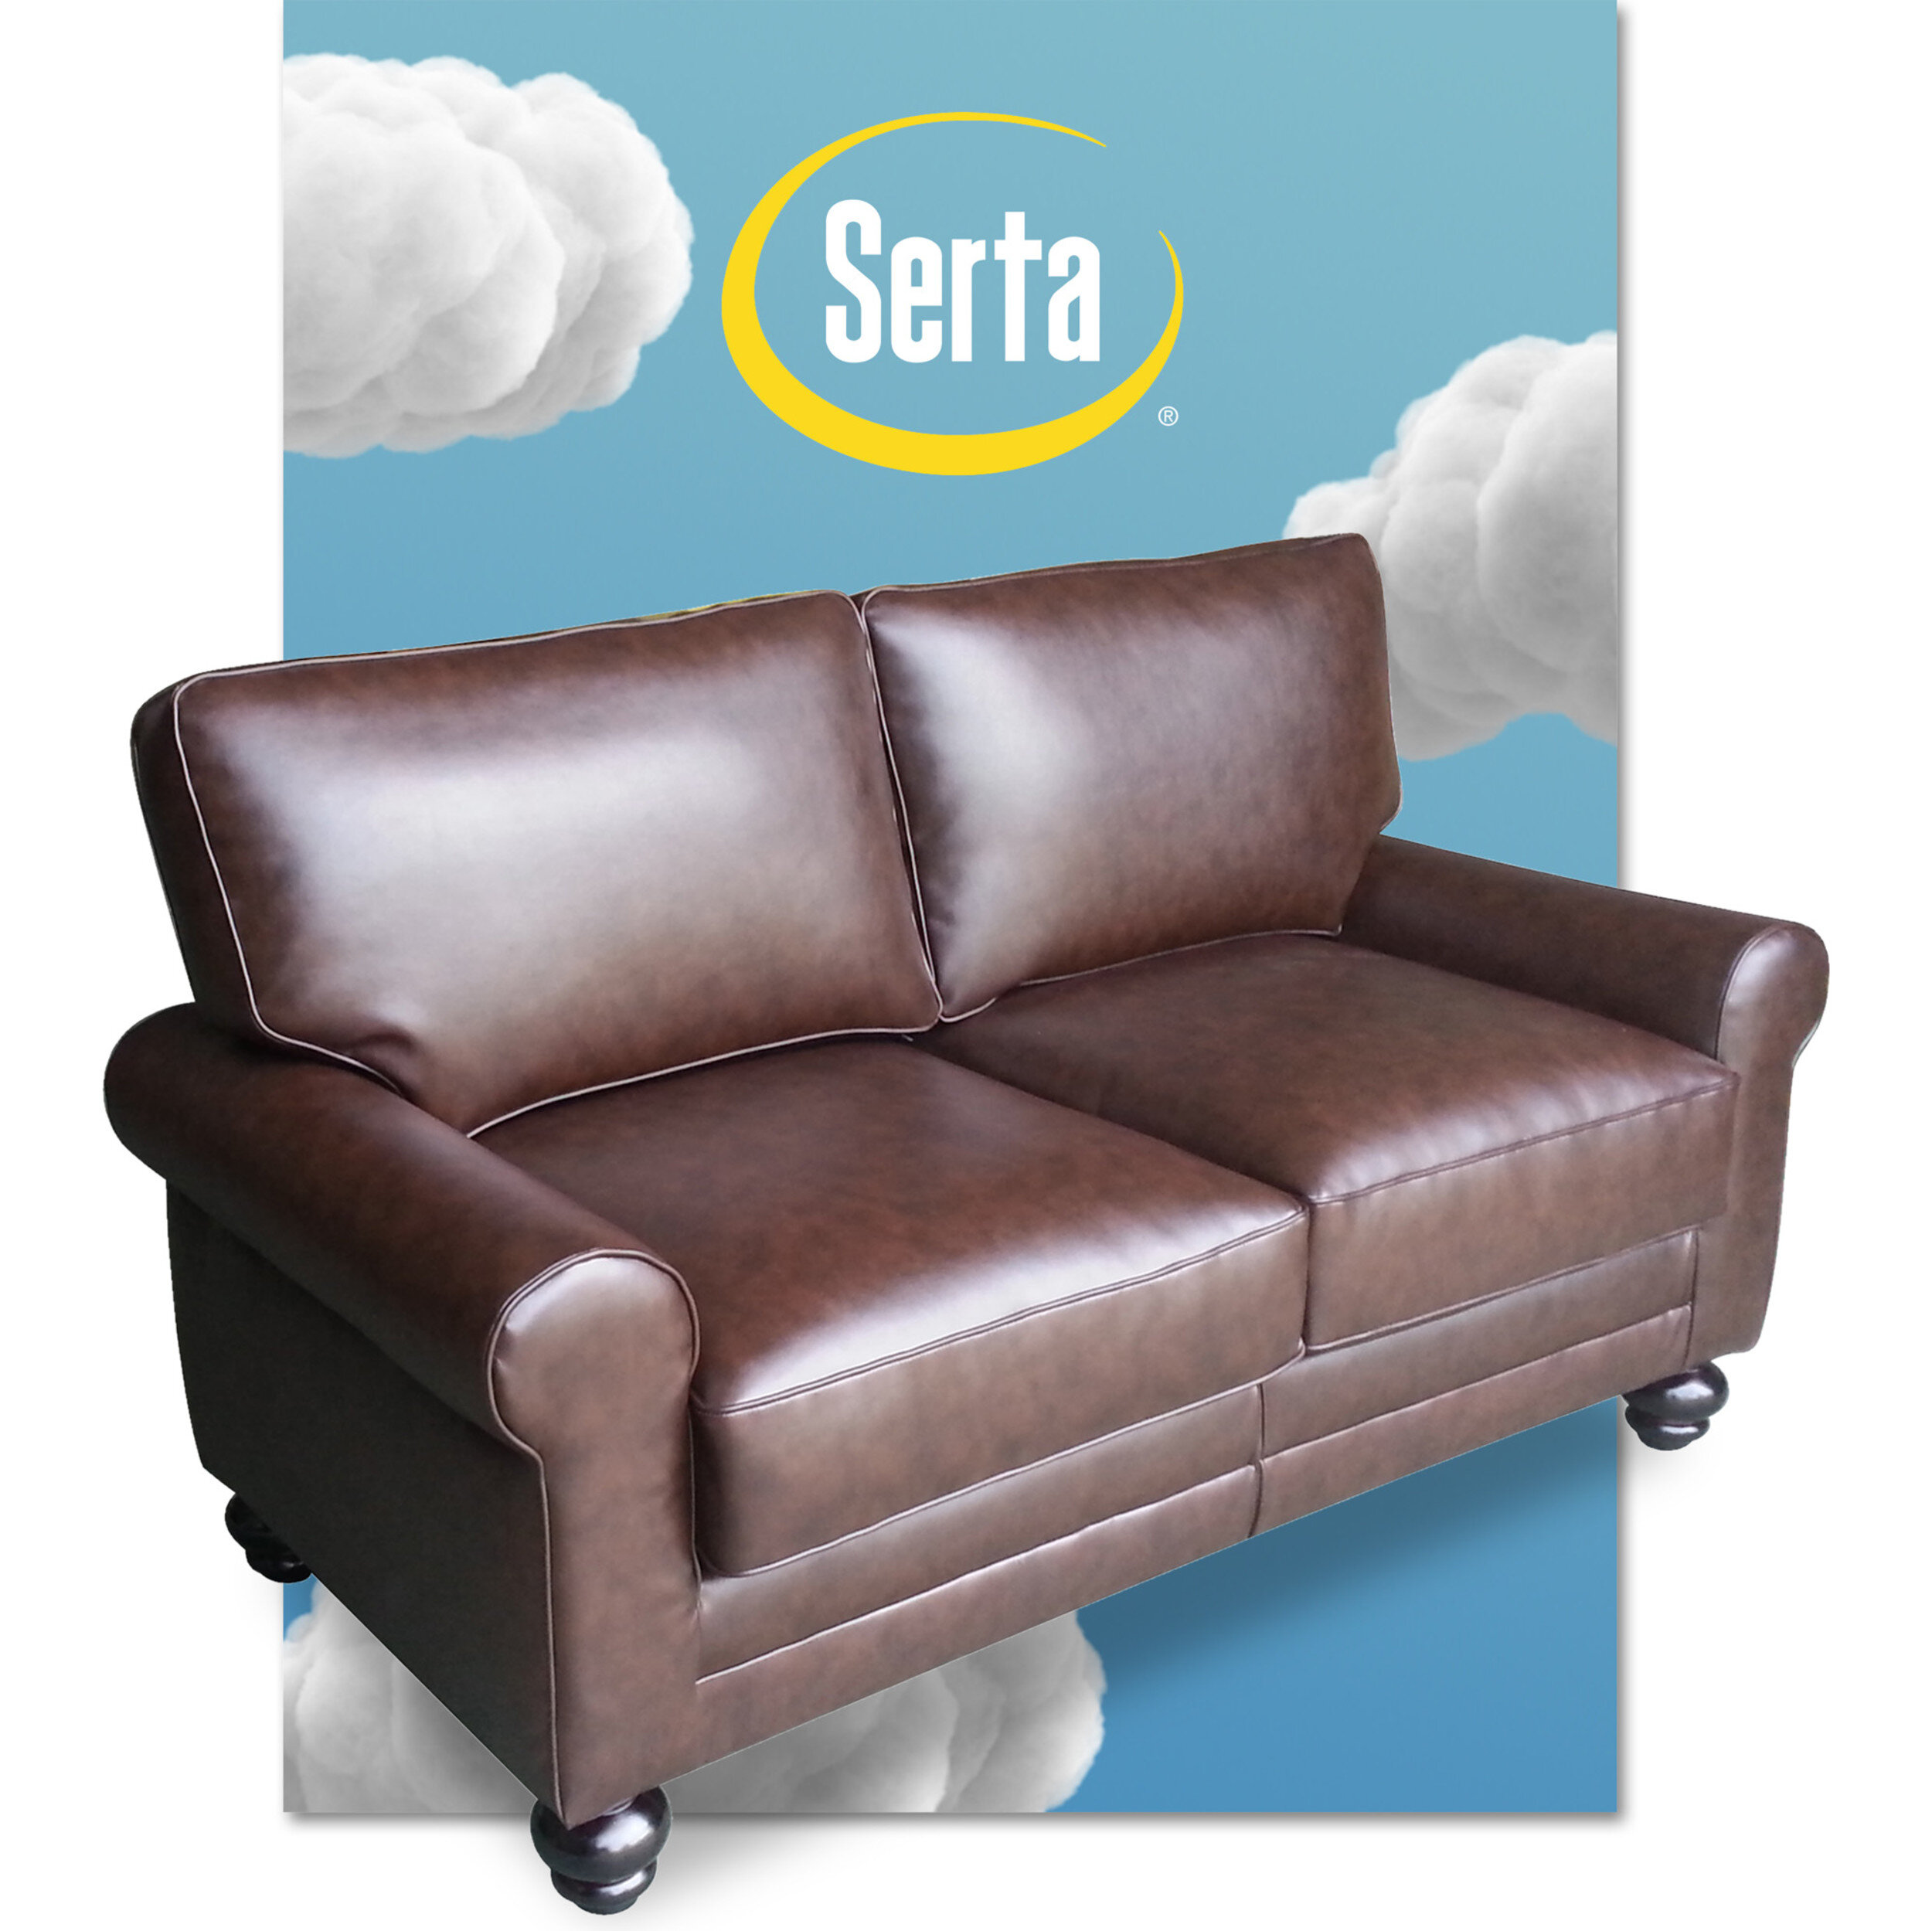 Serta at Home Serta for Back Reviews Cushions Rounded Pillowed 61\